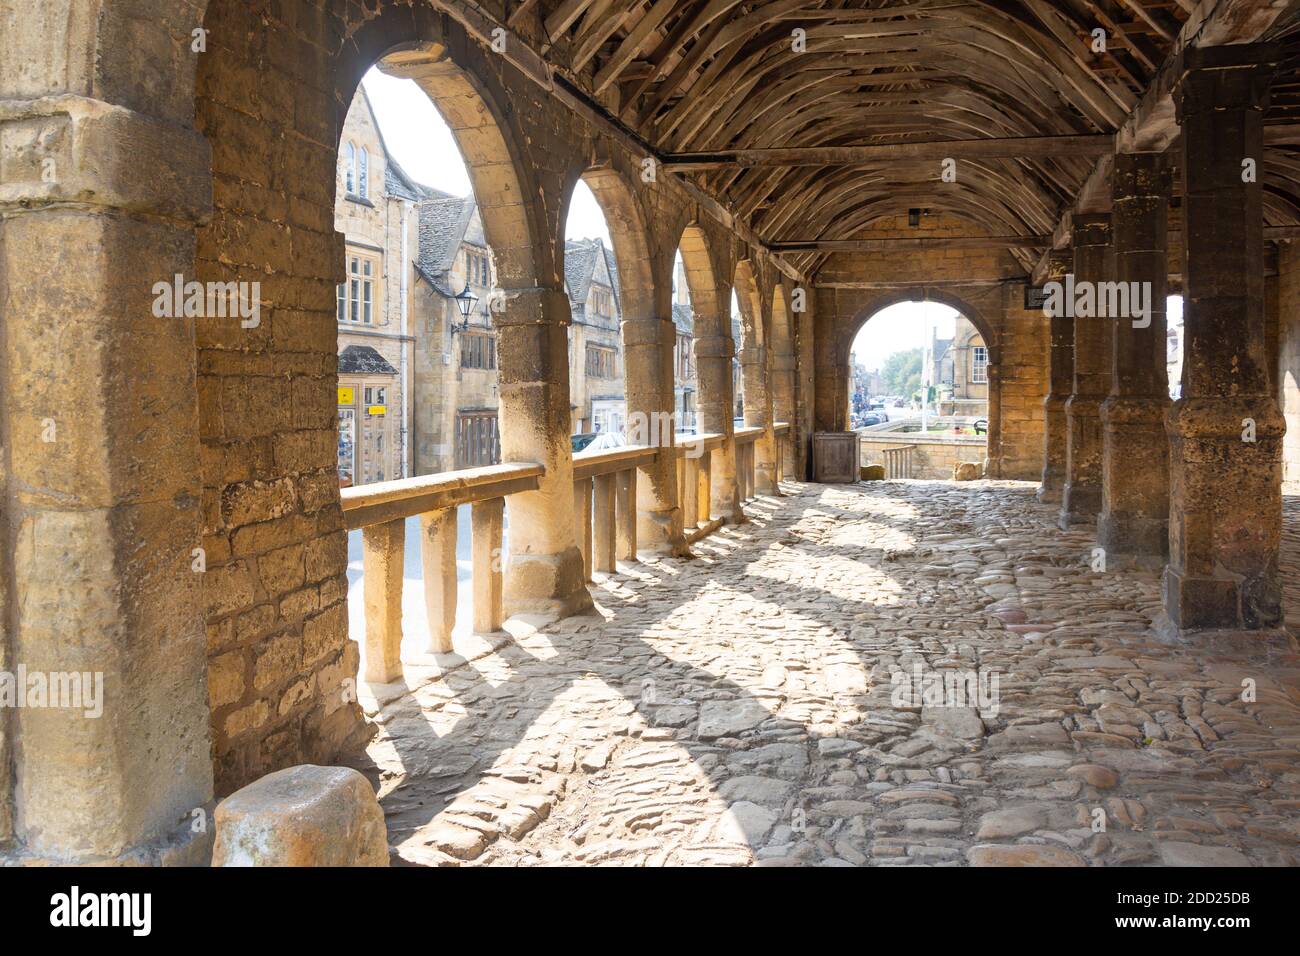 Medieval Market Hall, High Street, Chipping Campden, Gloucestershire, Inghilterra, Regno Unito Foto Stock